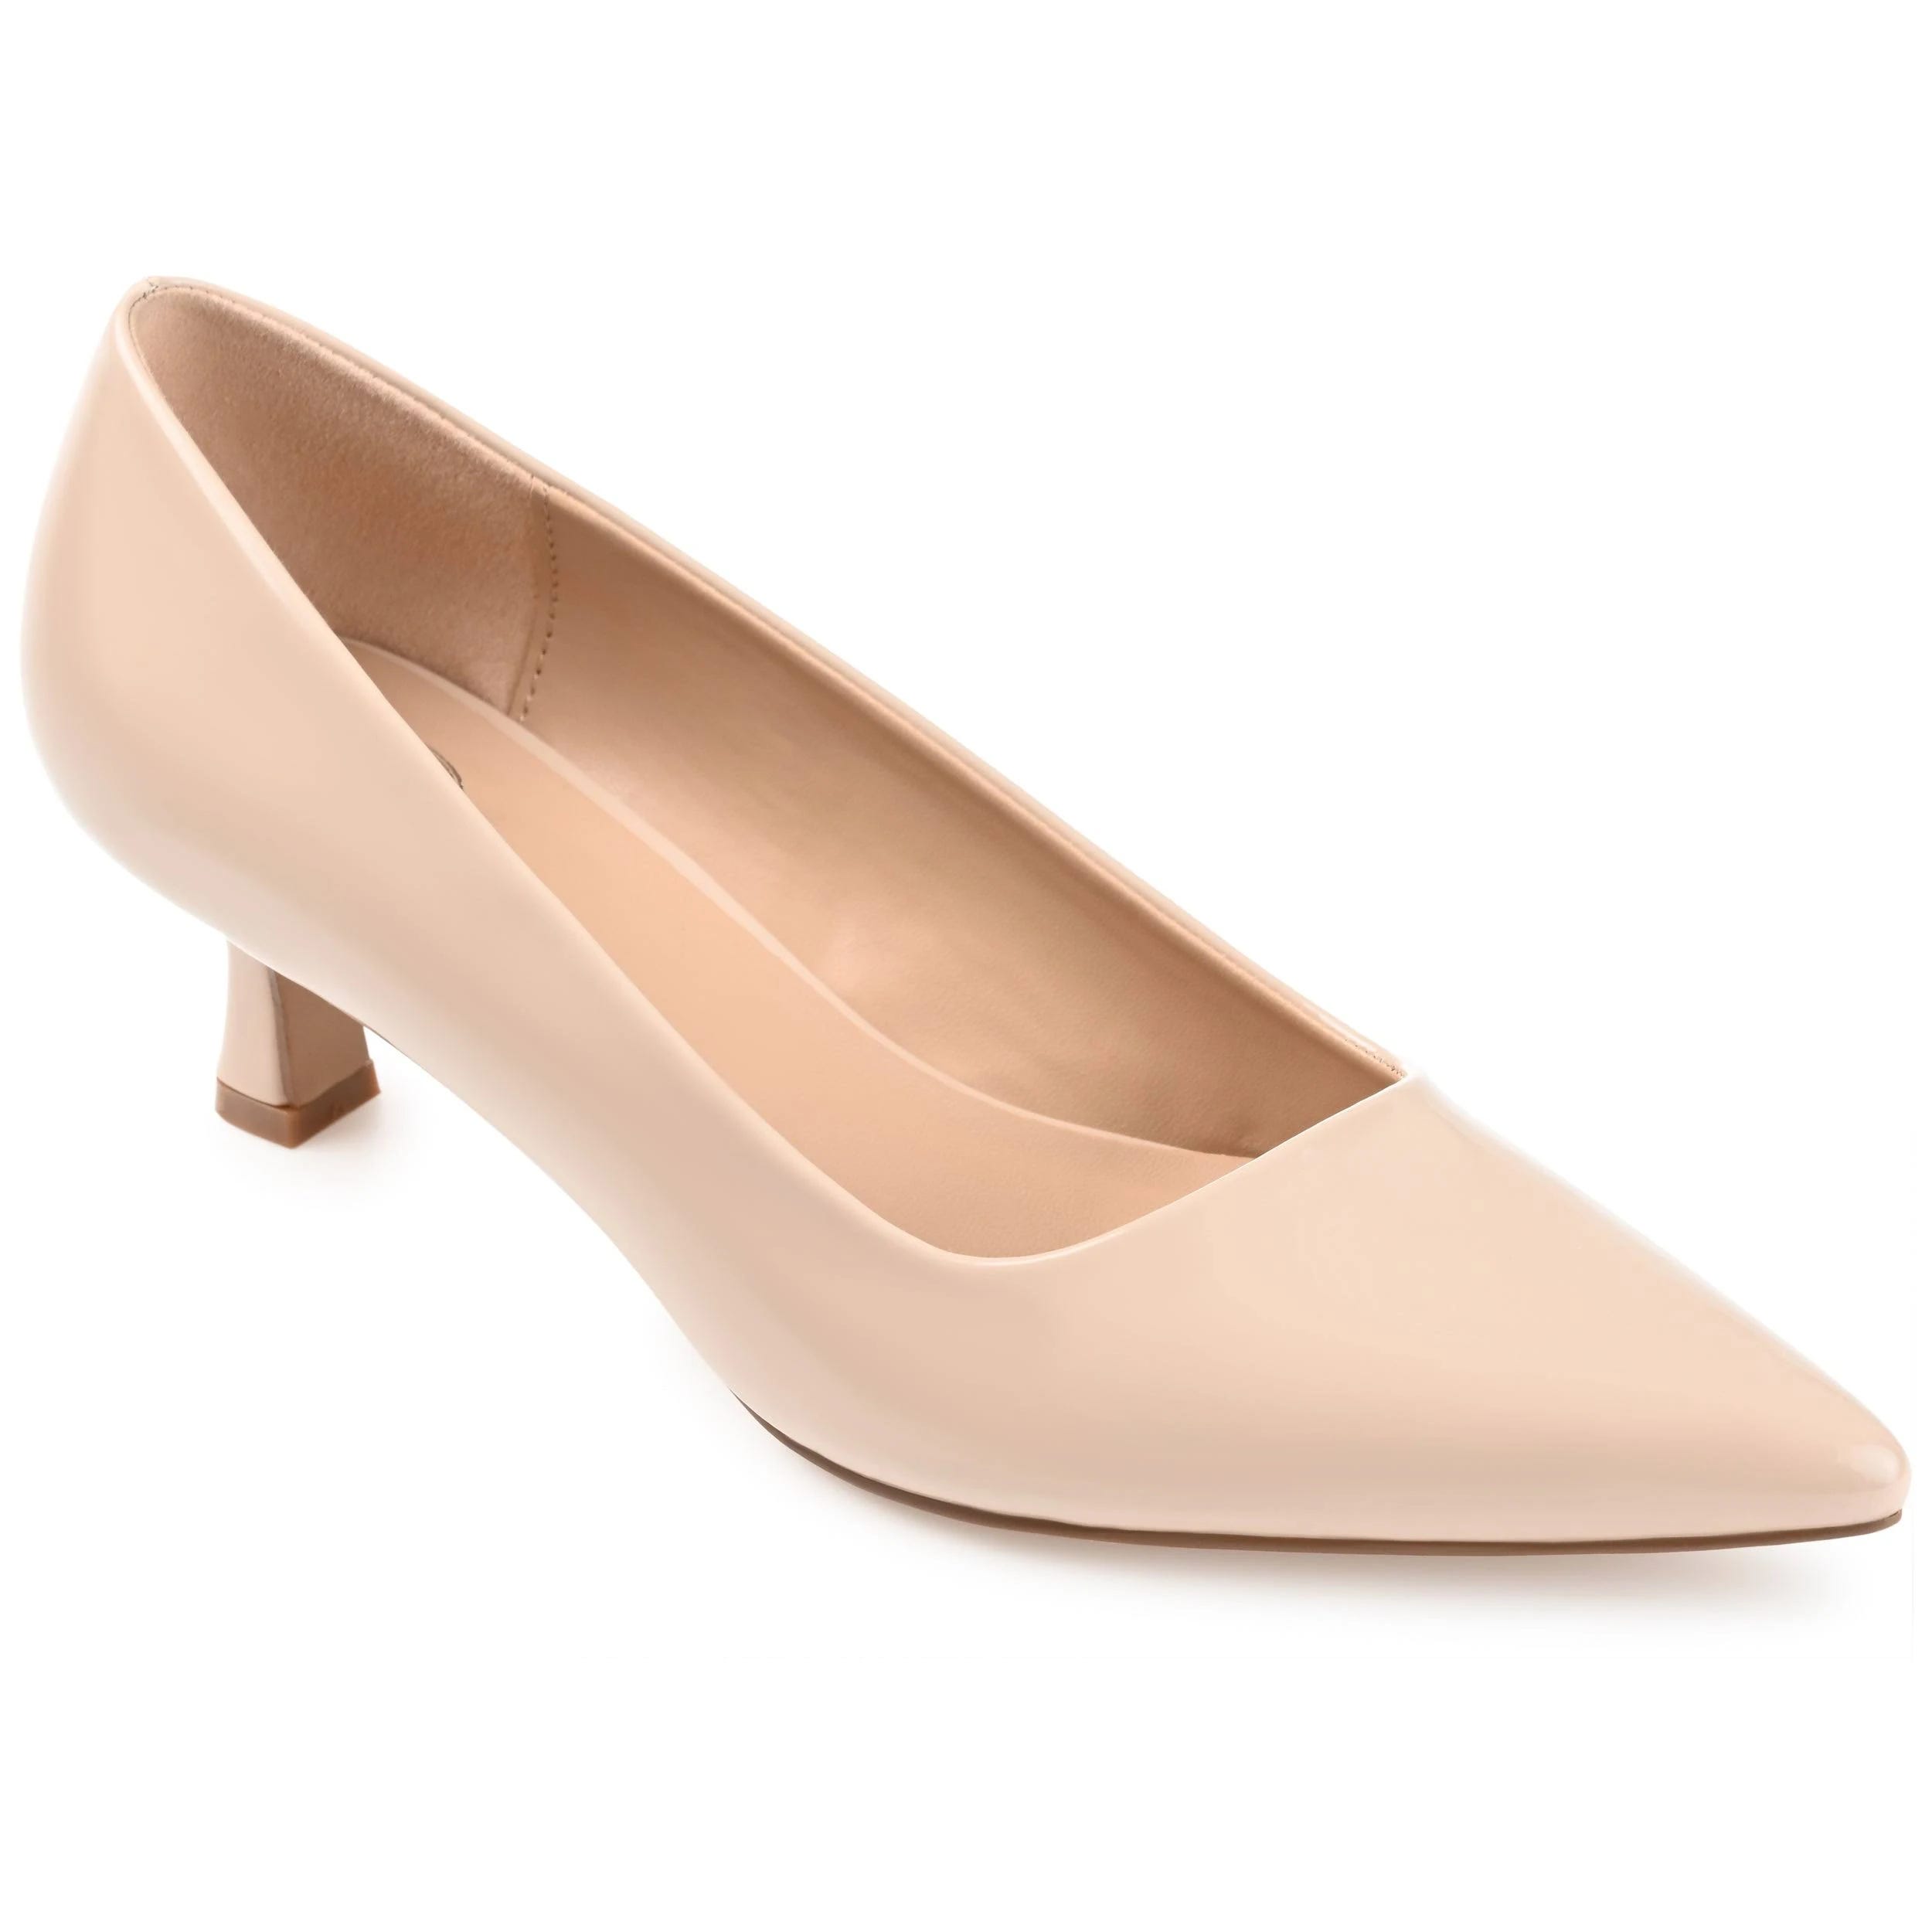 Fashionable Nude Patent Leather Pump with Comfortable Insole | Image